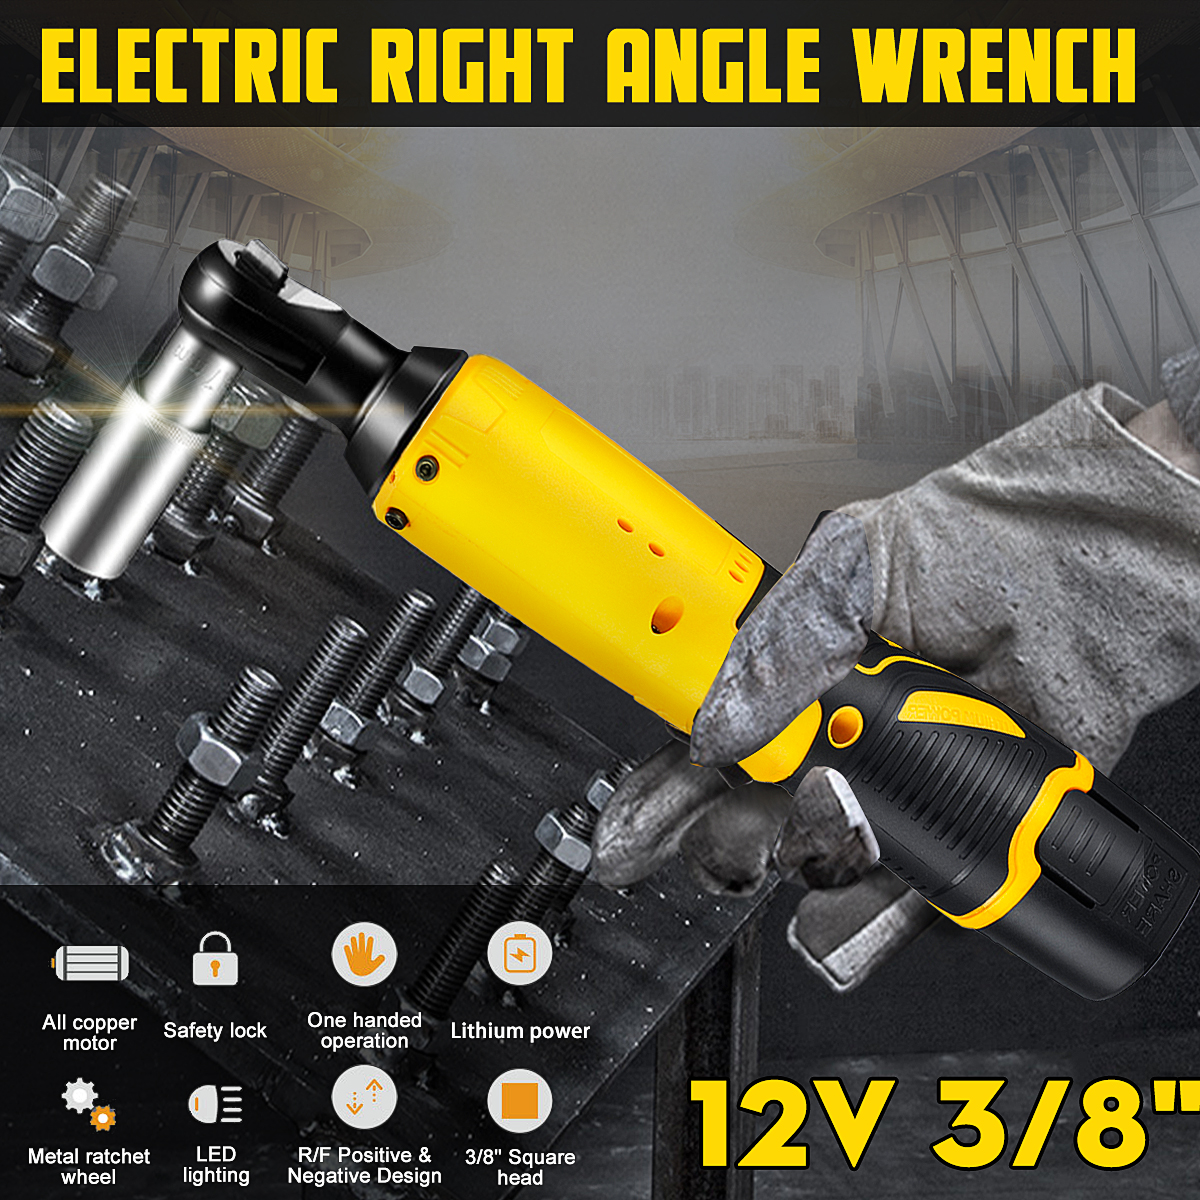 12V-45Nm-Ratchet-Wrench-Electric-Rechargeable-Ratchet-90deg-Right-Angle-Wrench-Powerful-Tool-1453814-2